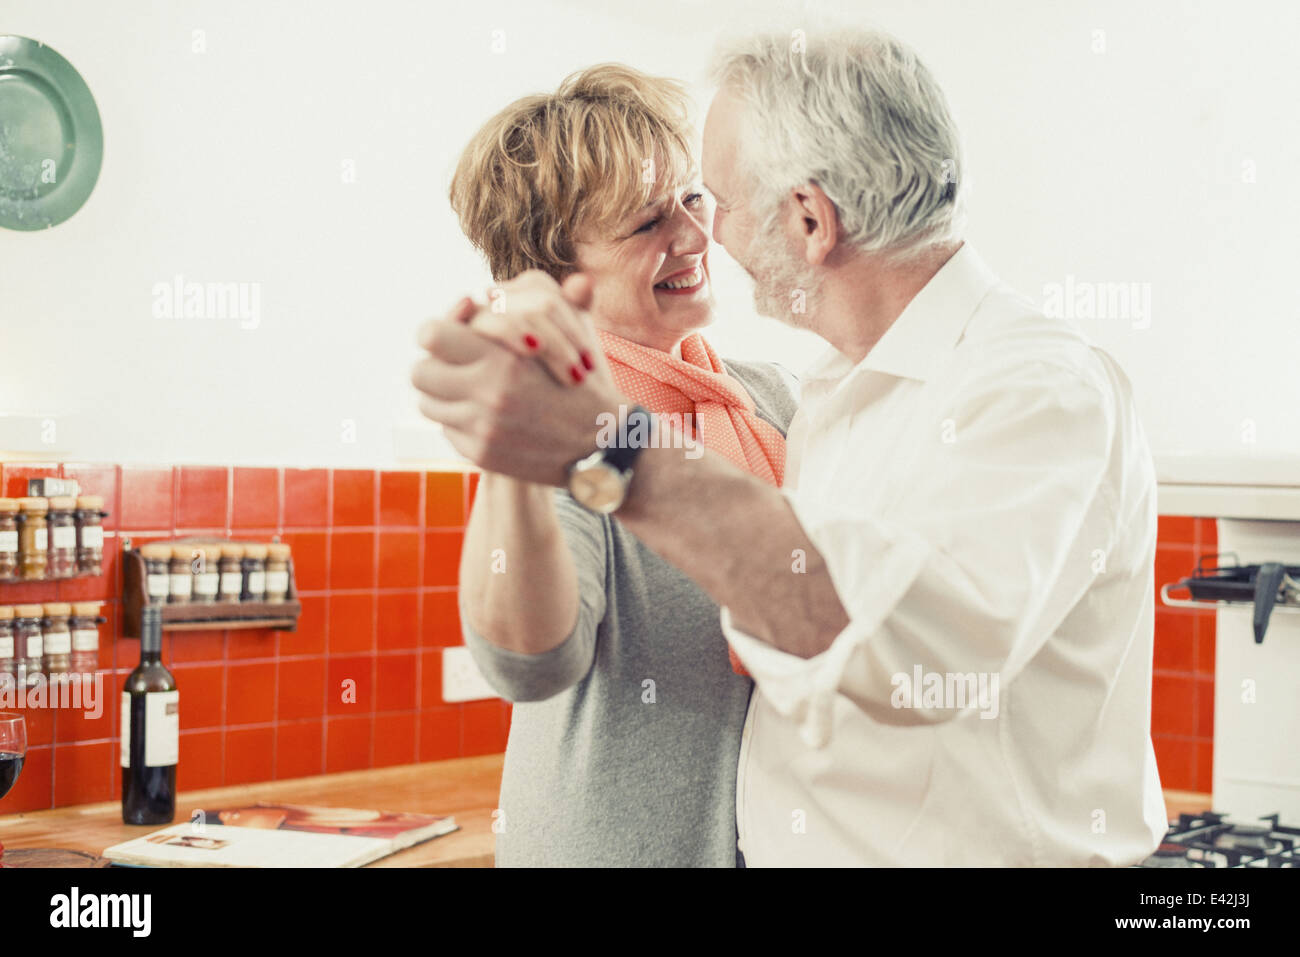 Couple dancing in kitchen Banque D'Images